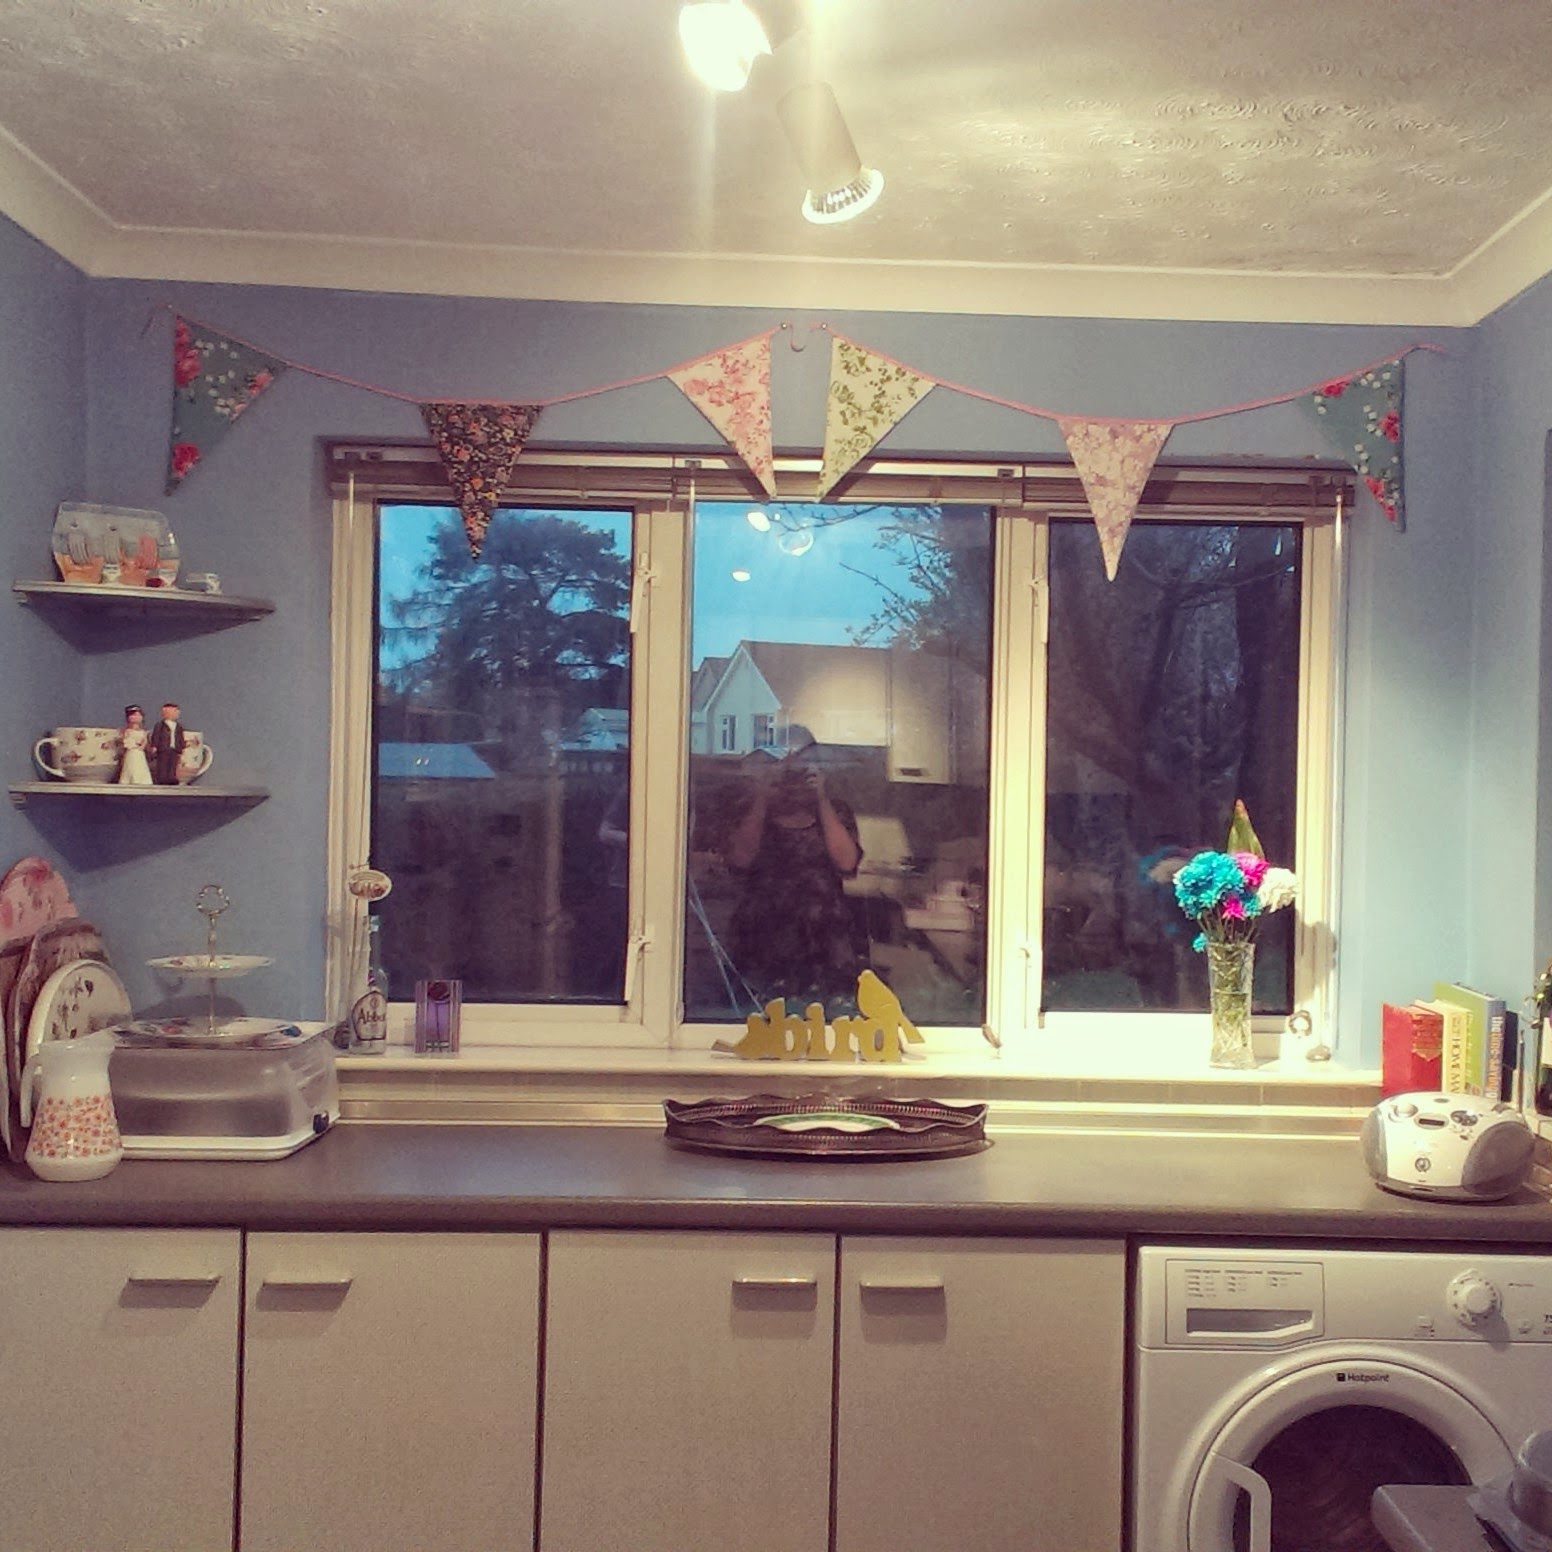 Clean and tidy kitchen